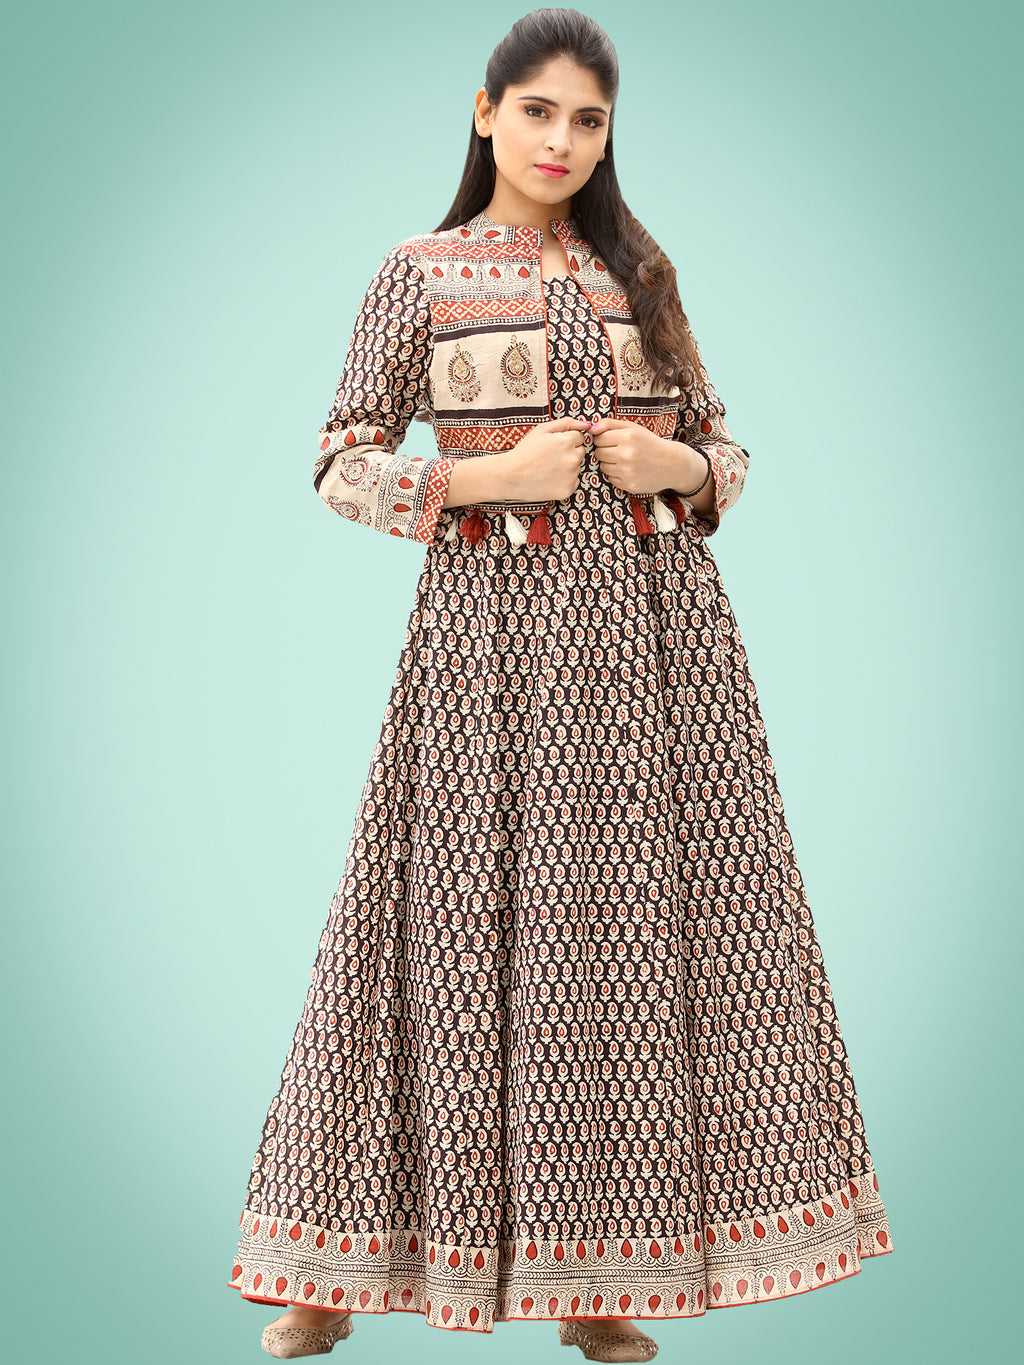 Naaz Roheen - Hand Block Printed Long Cotton Embroidered Jacket ...